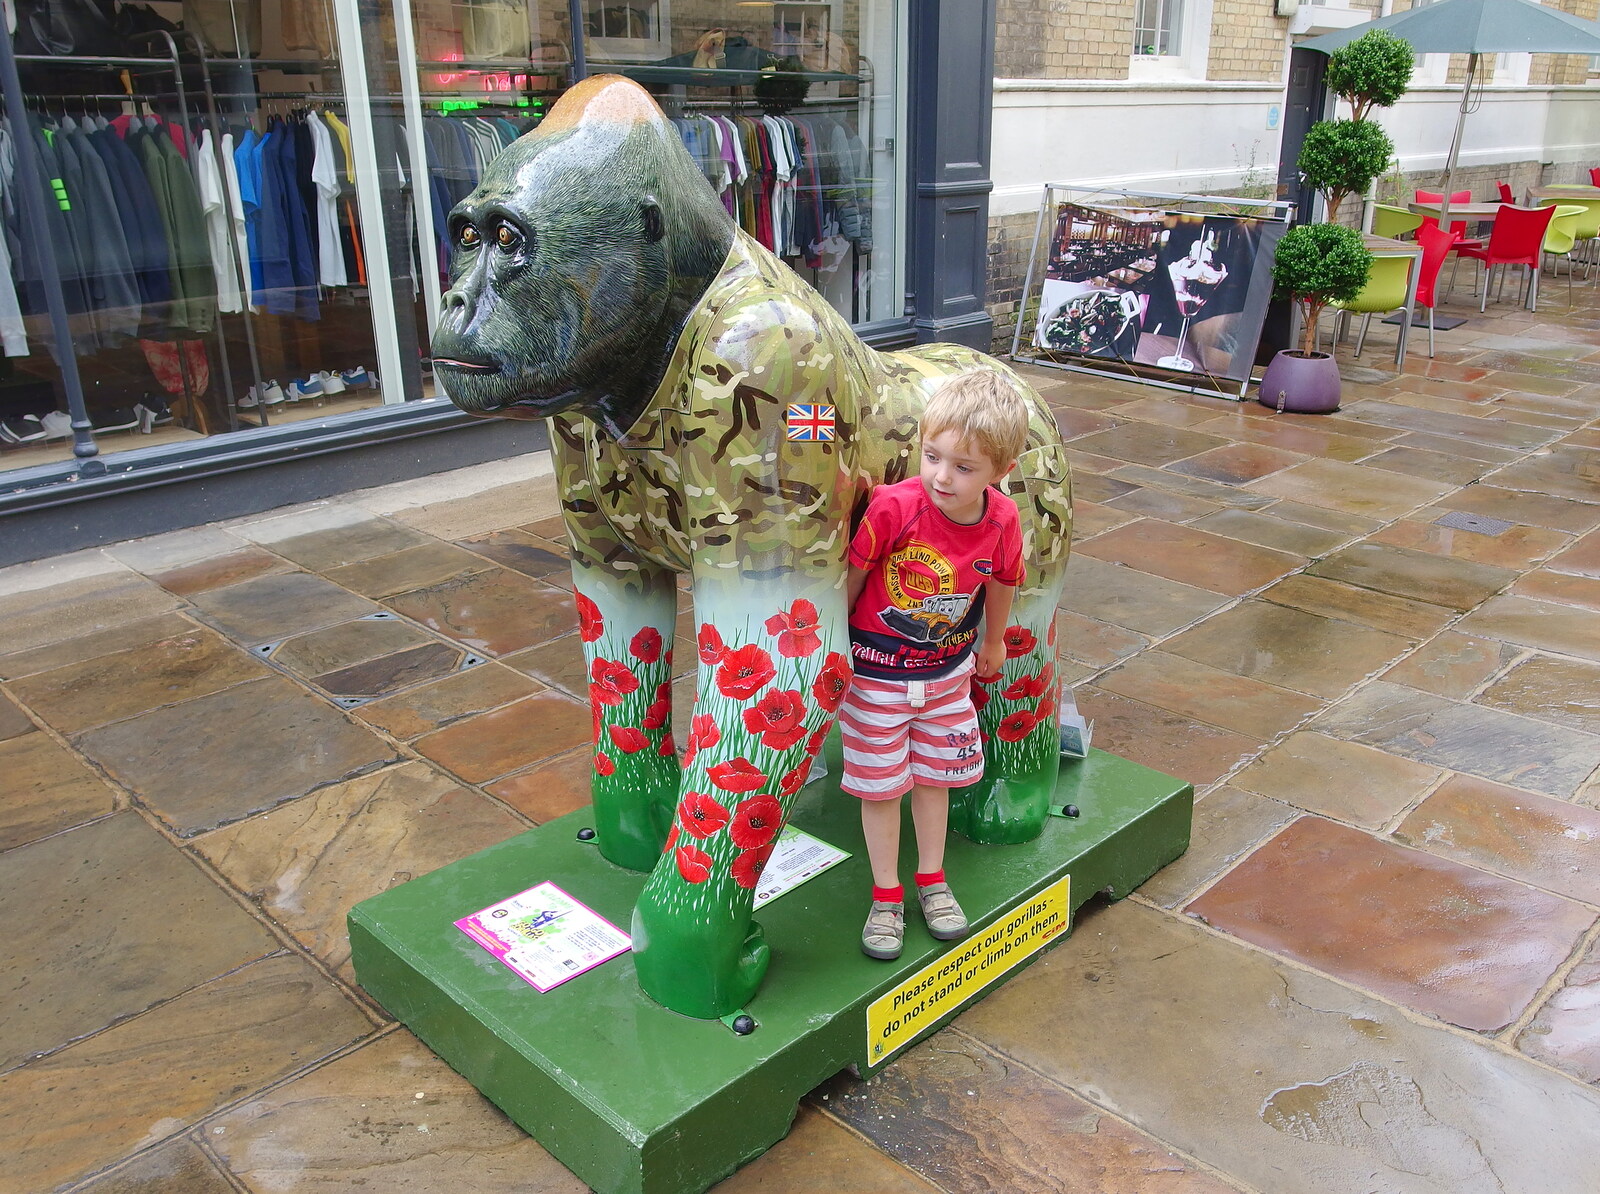 Fred leans in from The Gorillas of Norwich, Norfolk - 5th August 2013